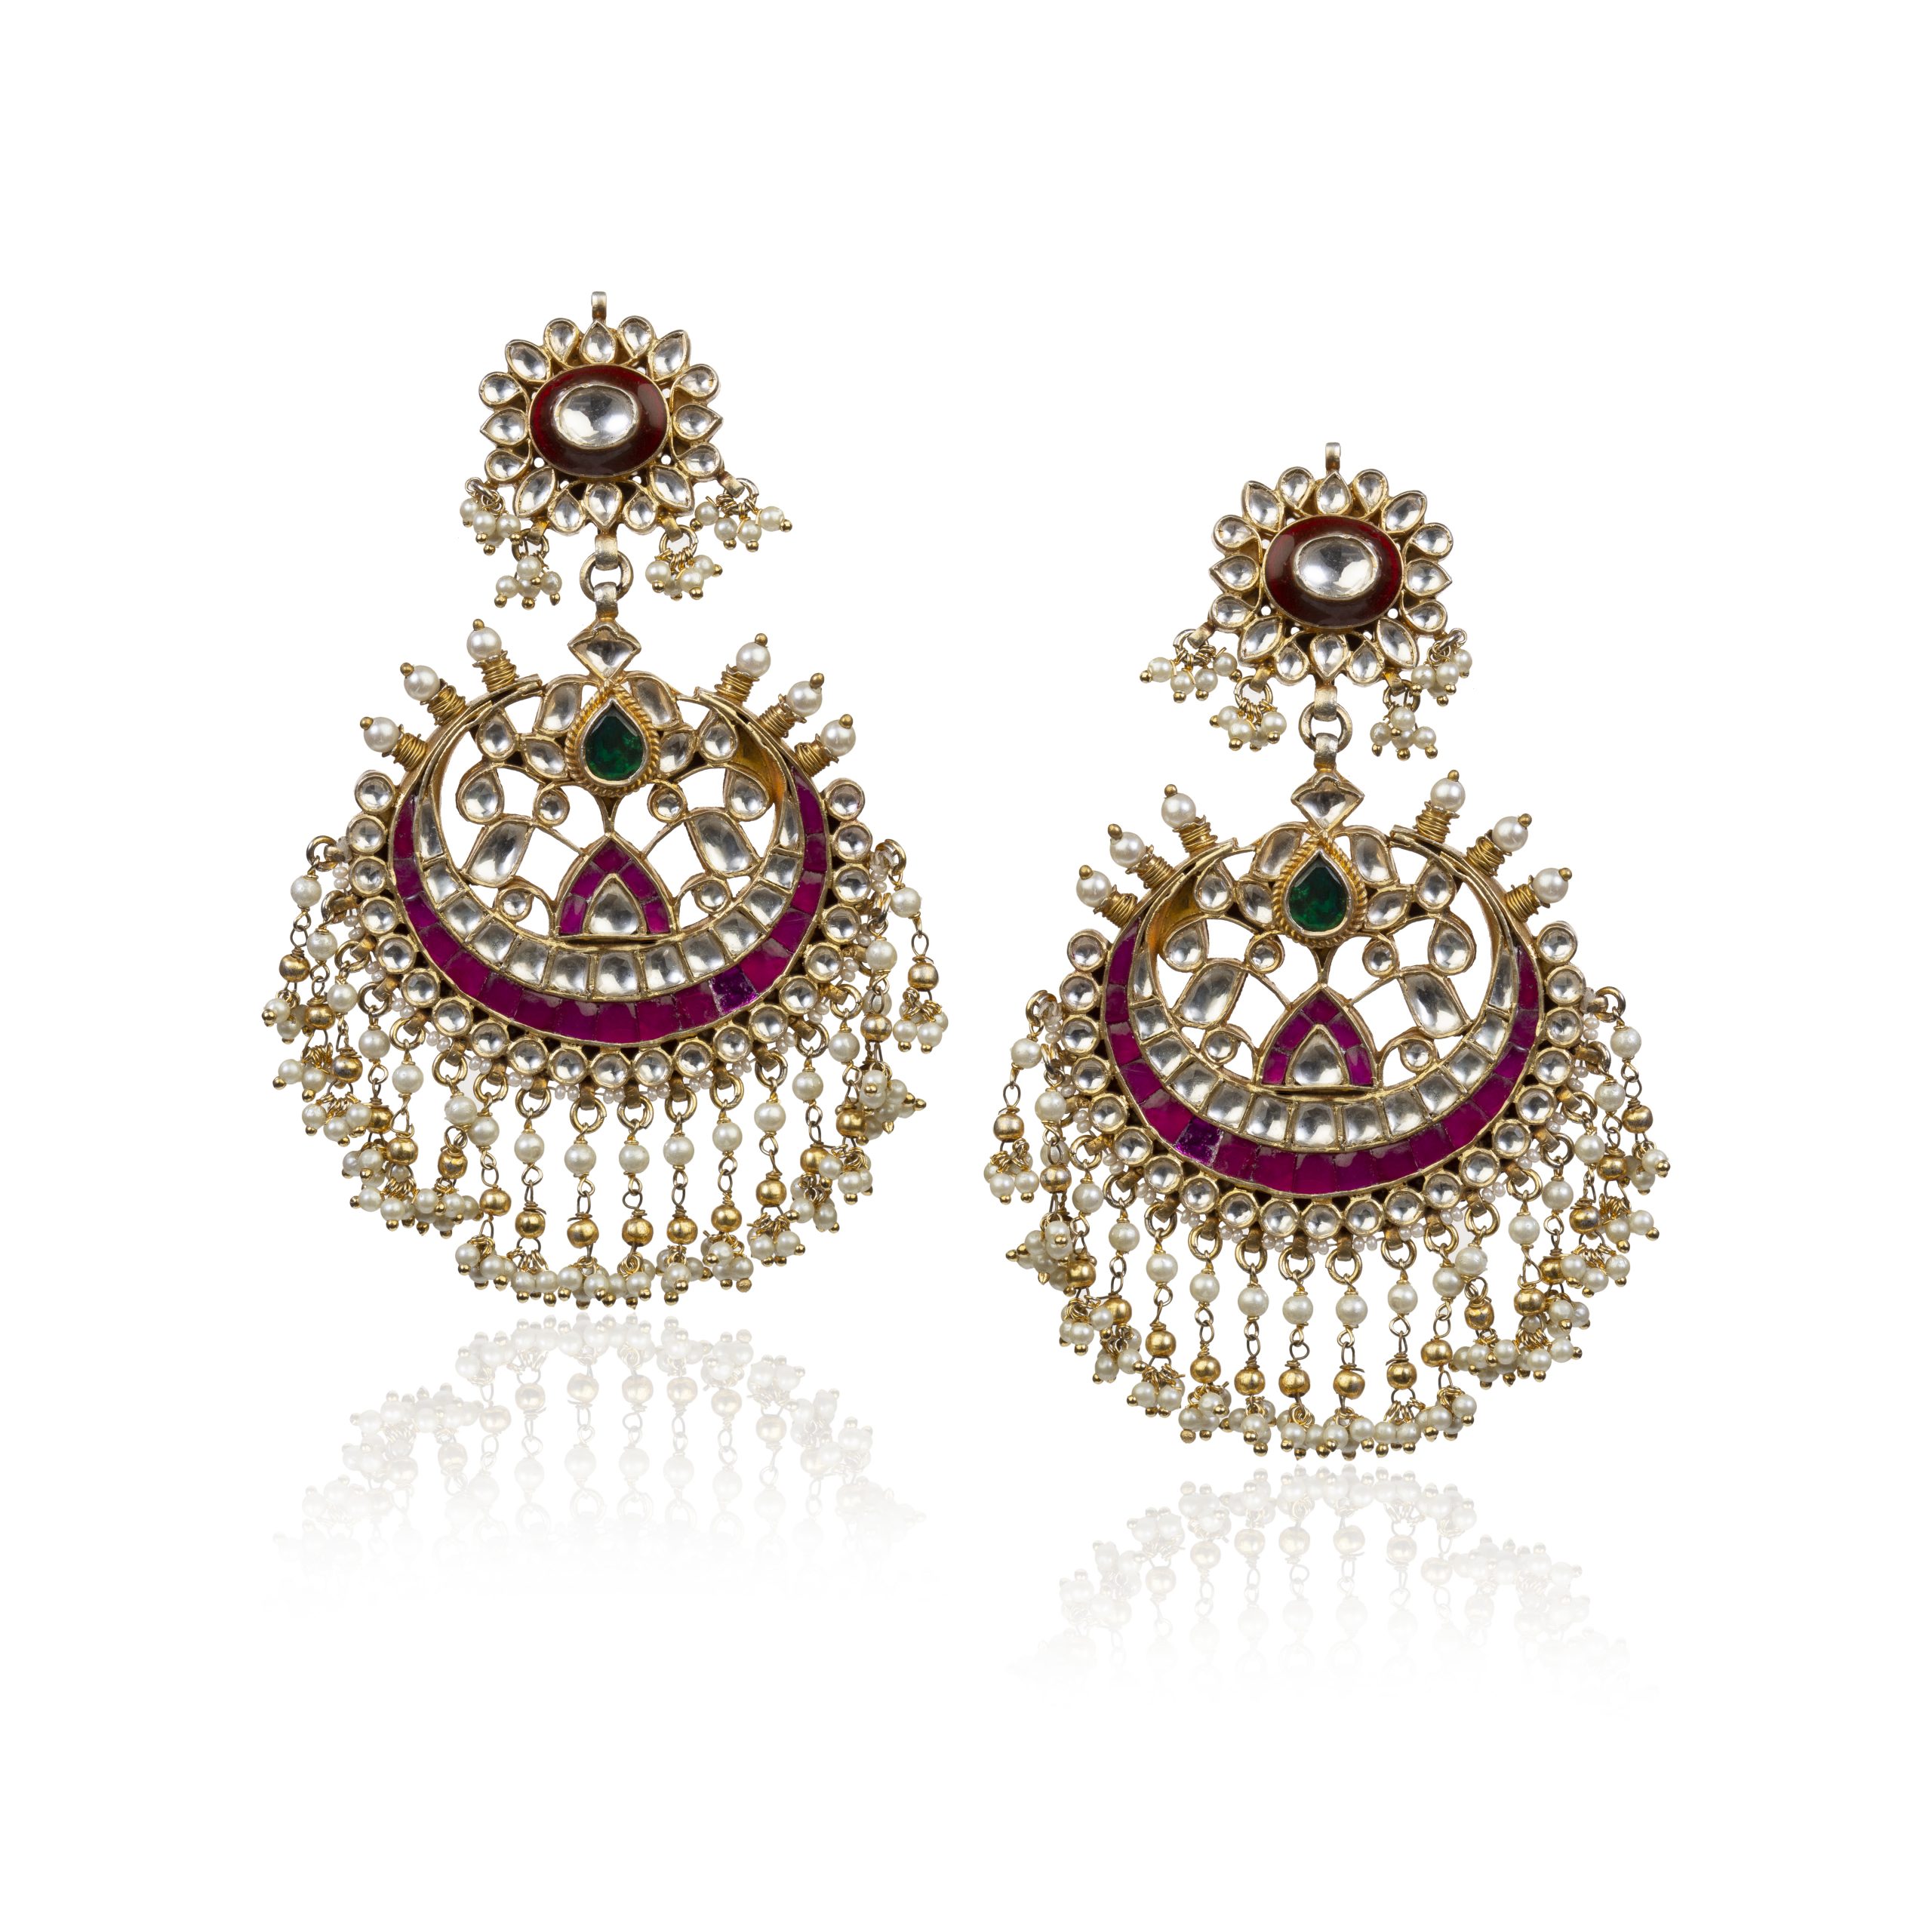 BROWN AND RED BIG EARRINGS WITH JADTAR STONE - Riana jewellery - Buy ...